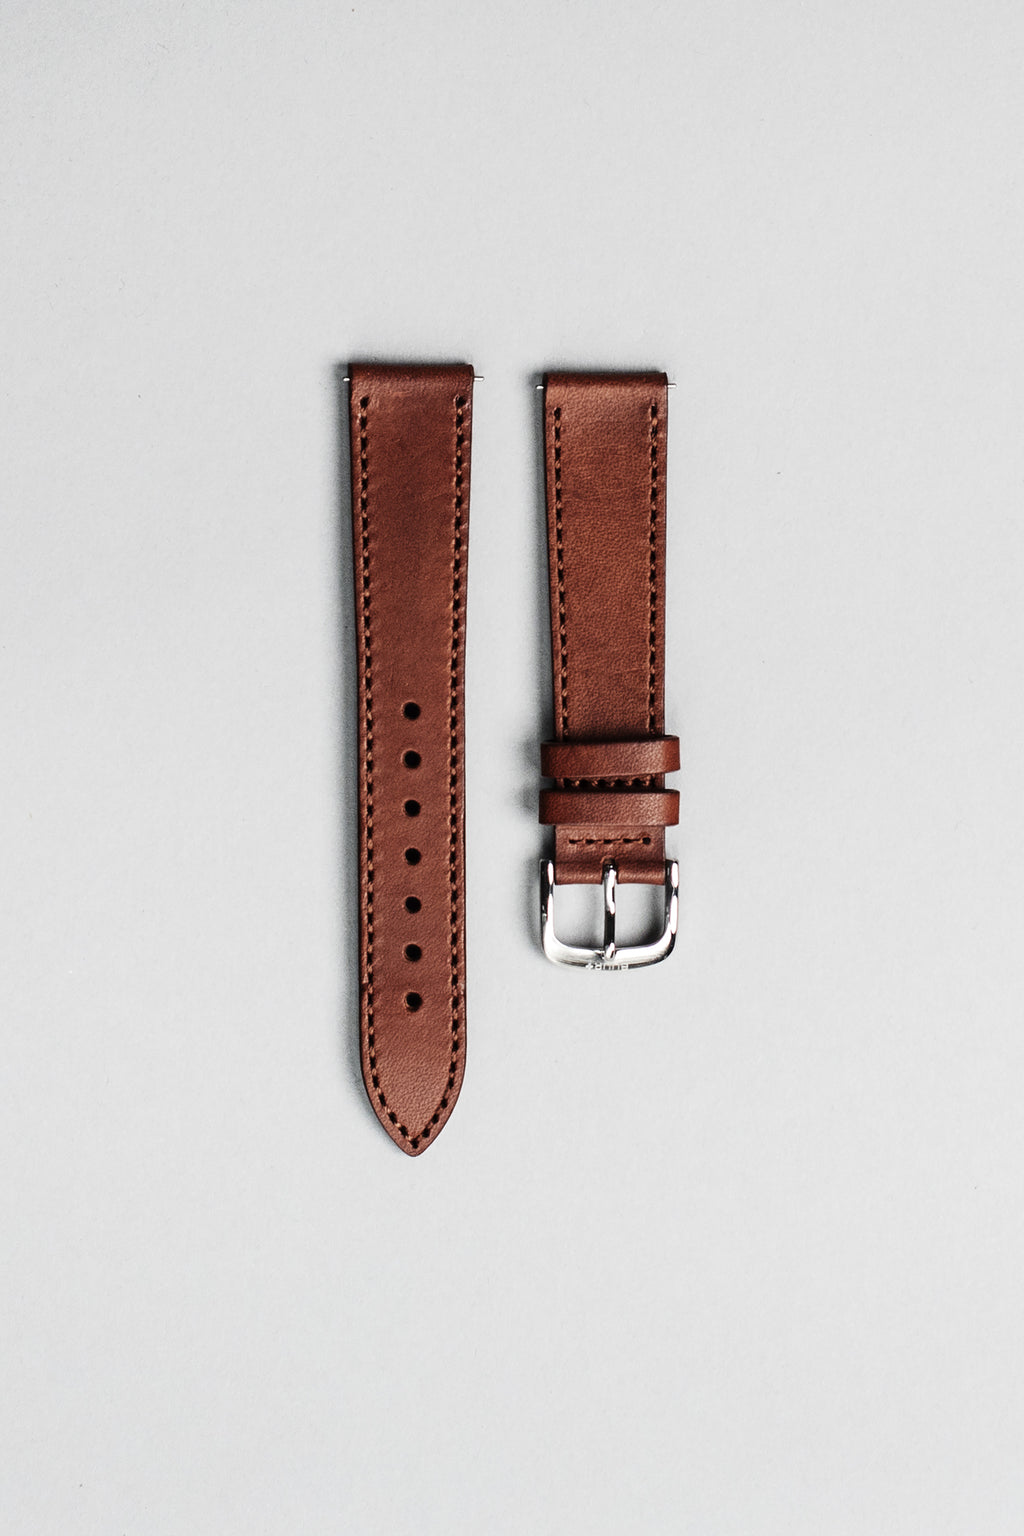 The brown Italian veg tan leather strap with polished buckle. 18mm